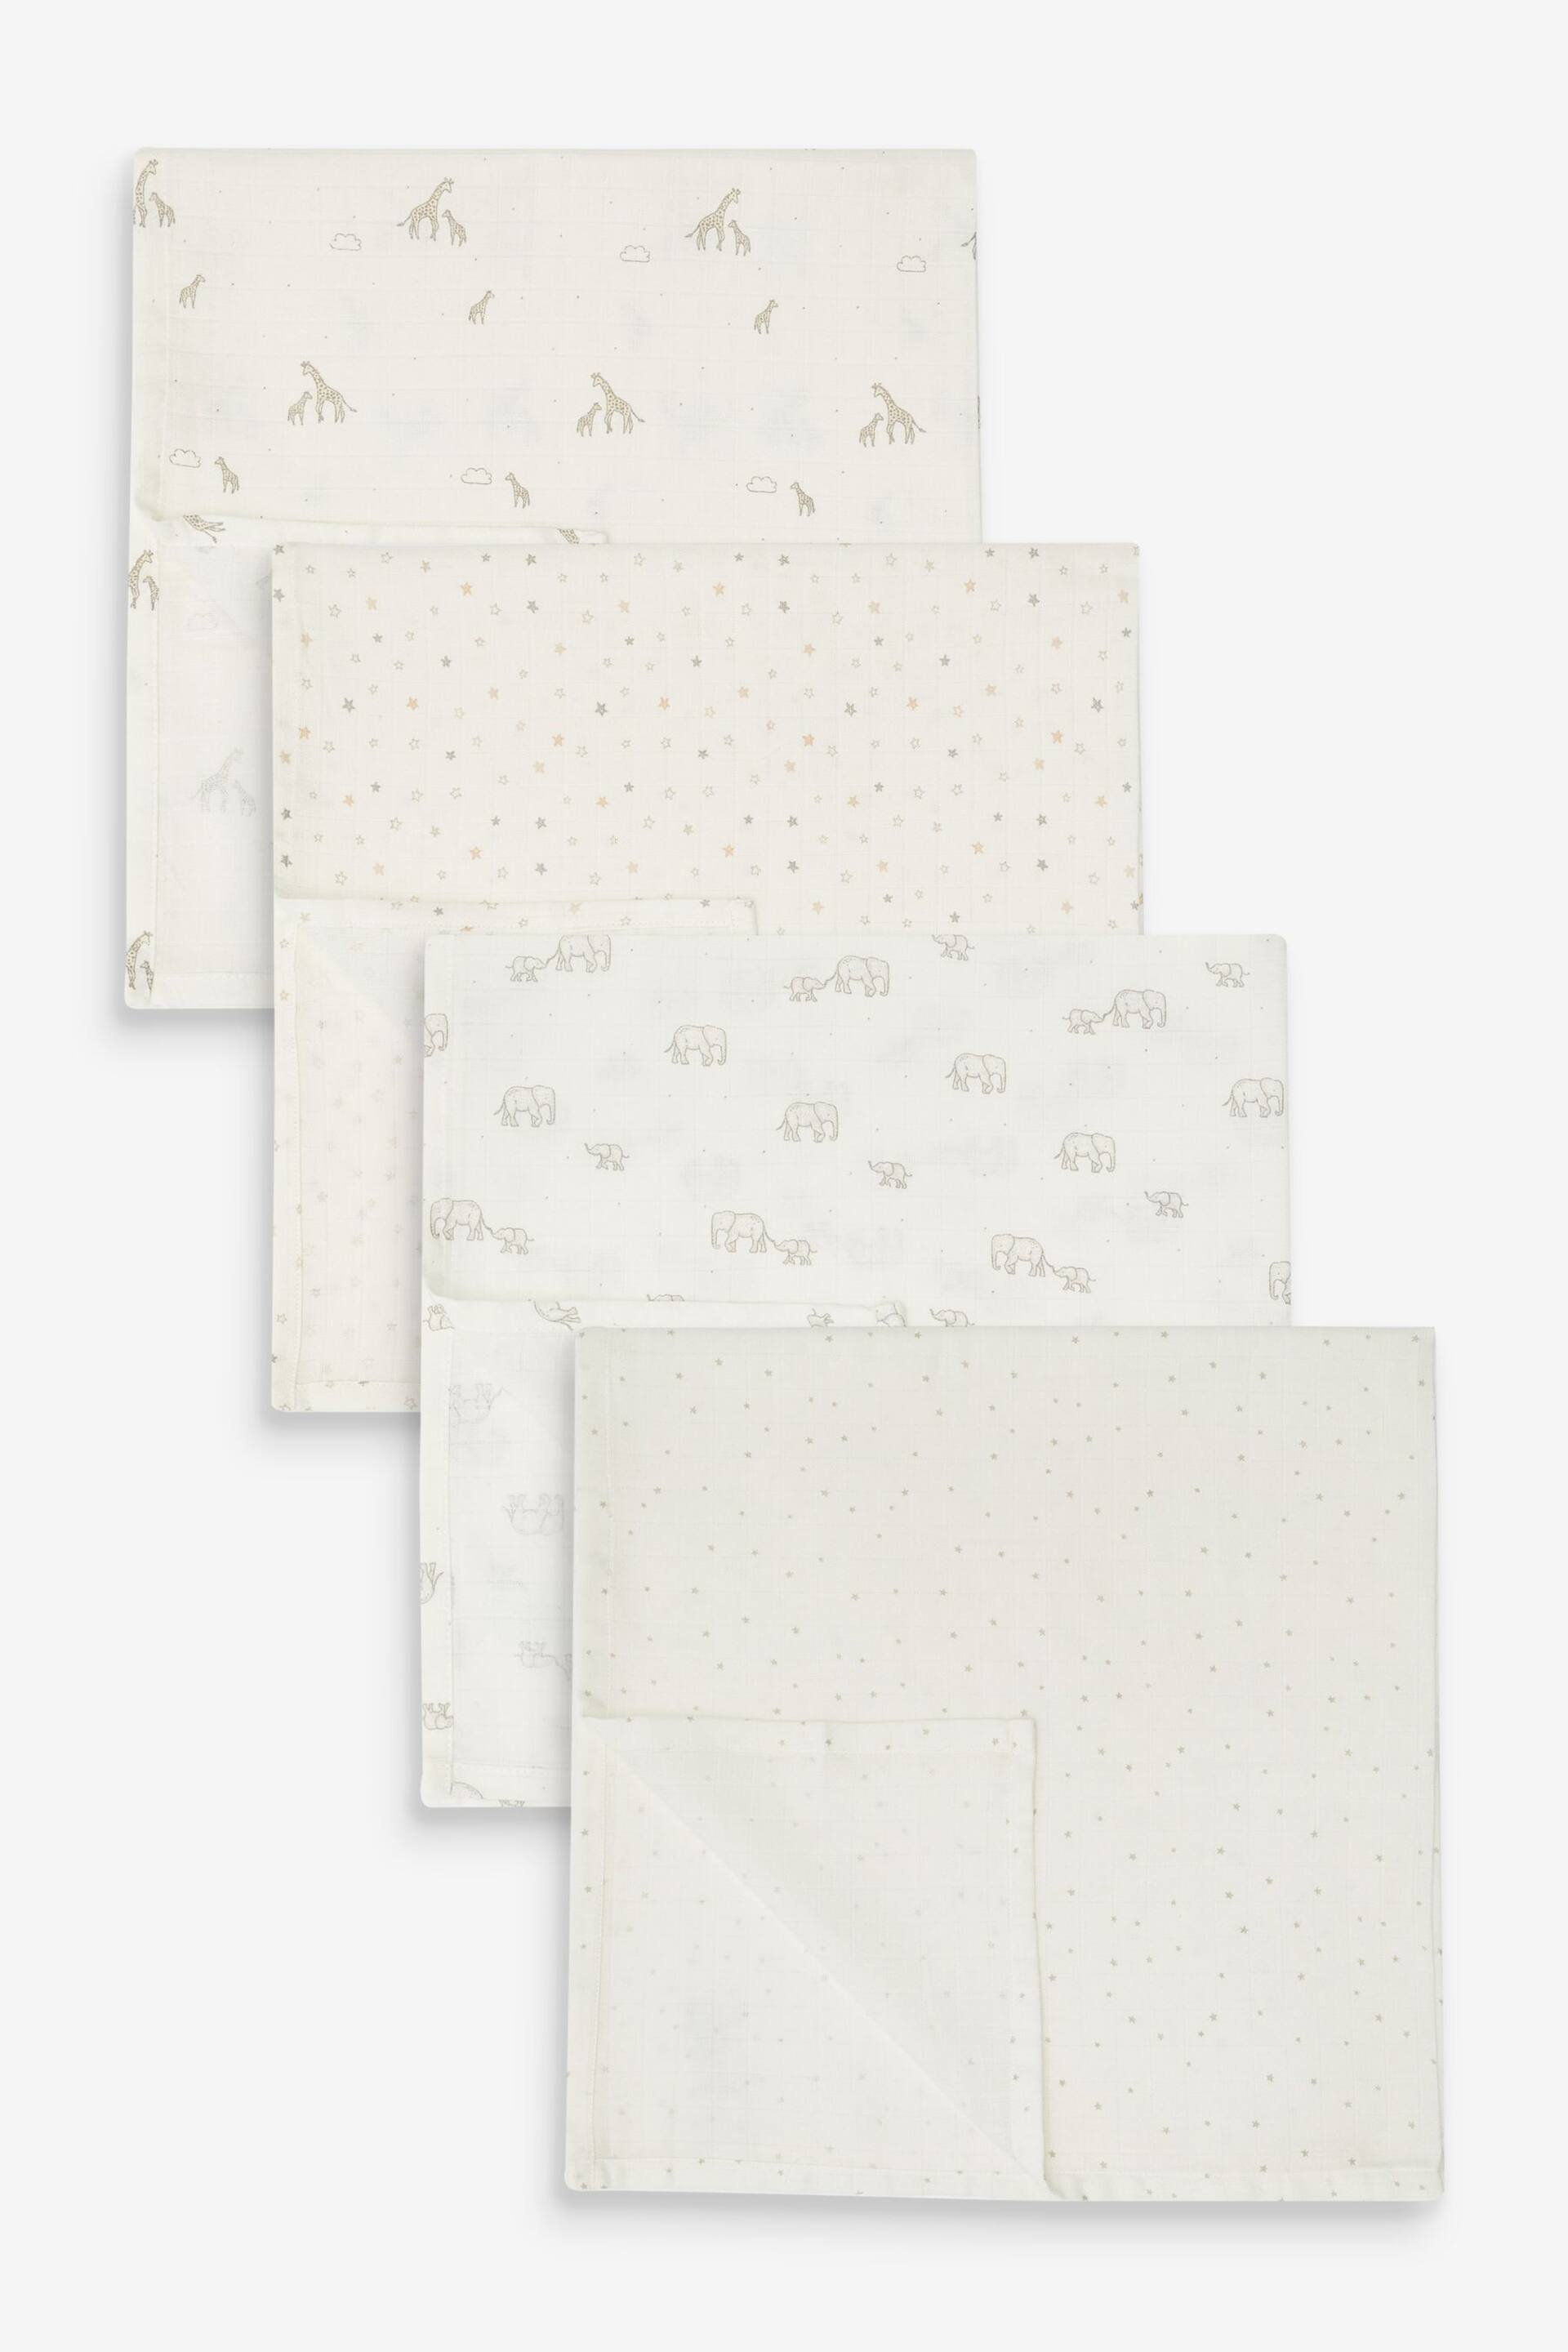 Soft White Baby Muslin Cloths 4 Packs - Image 1 of 5